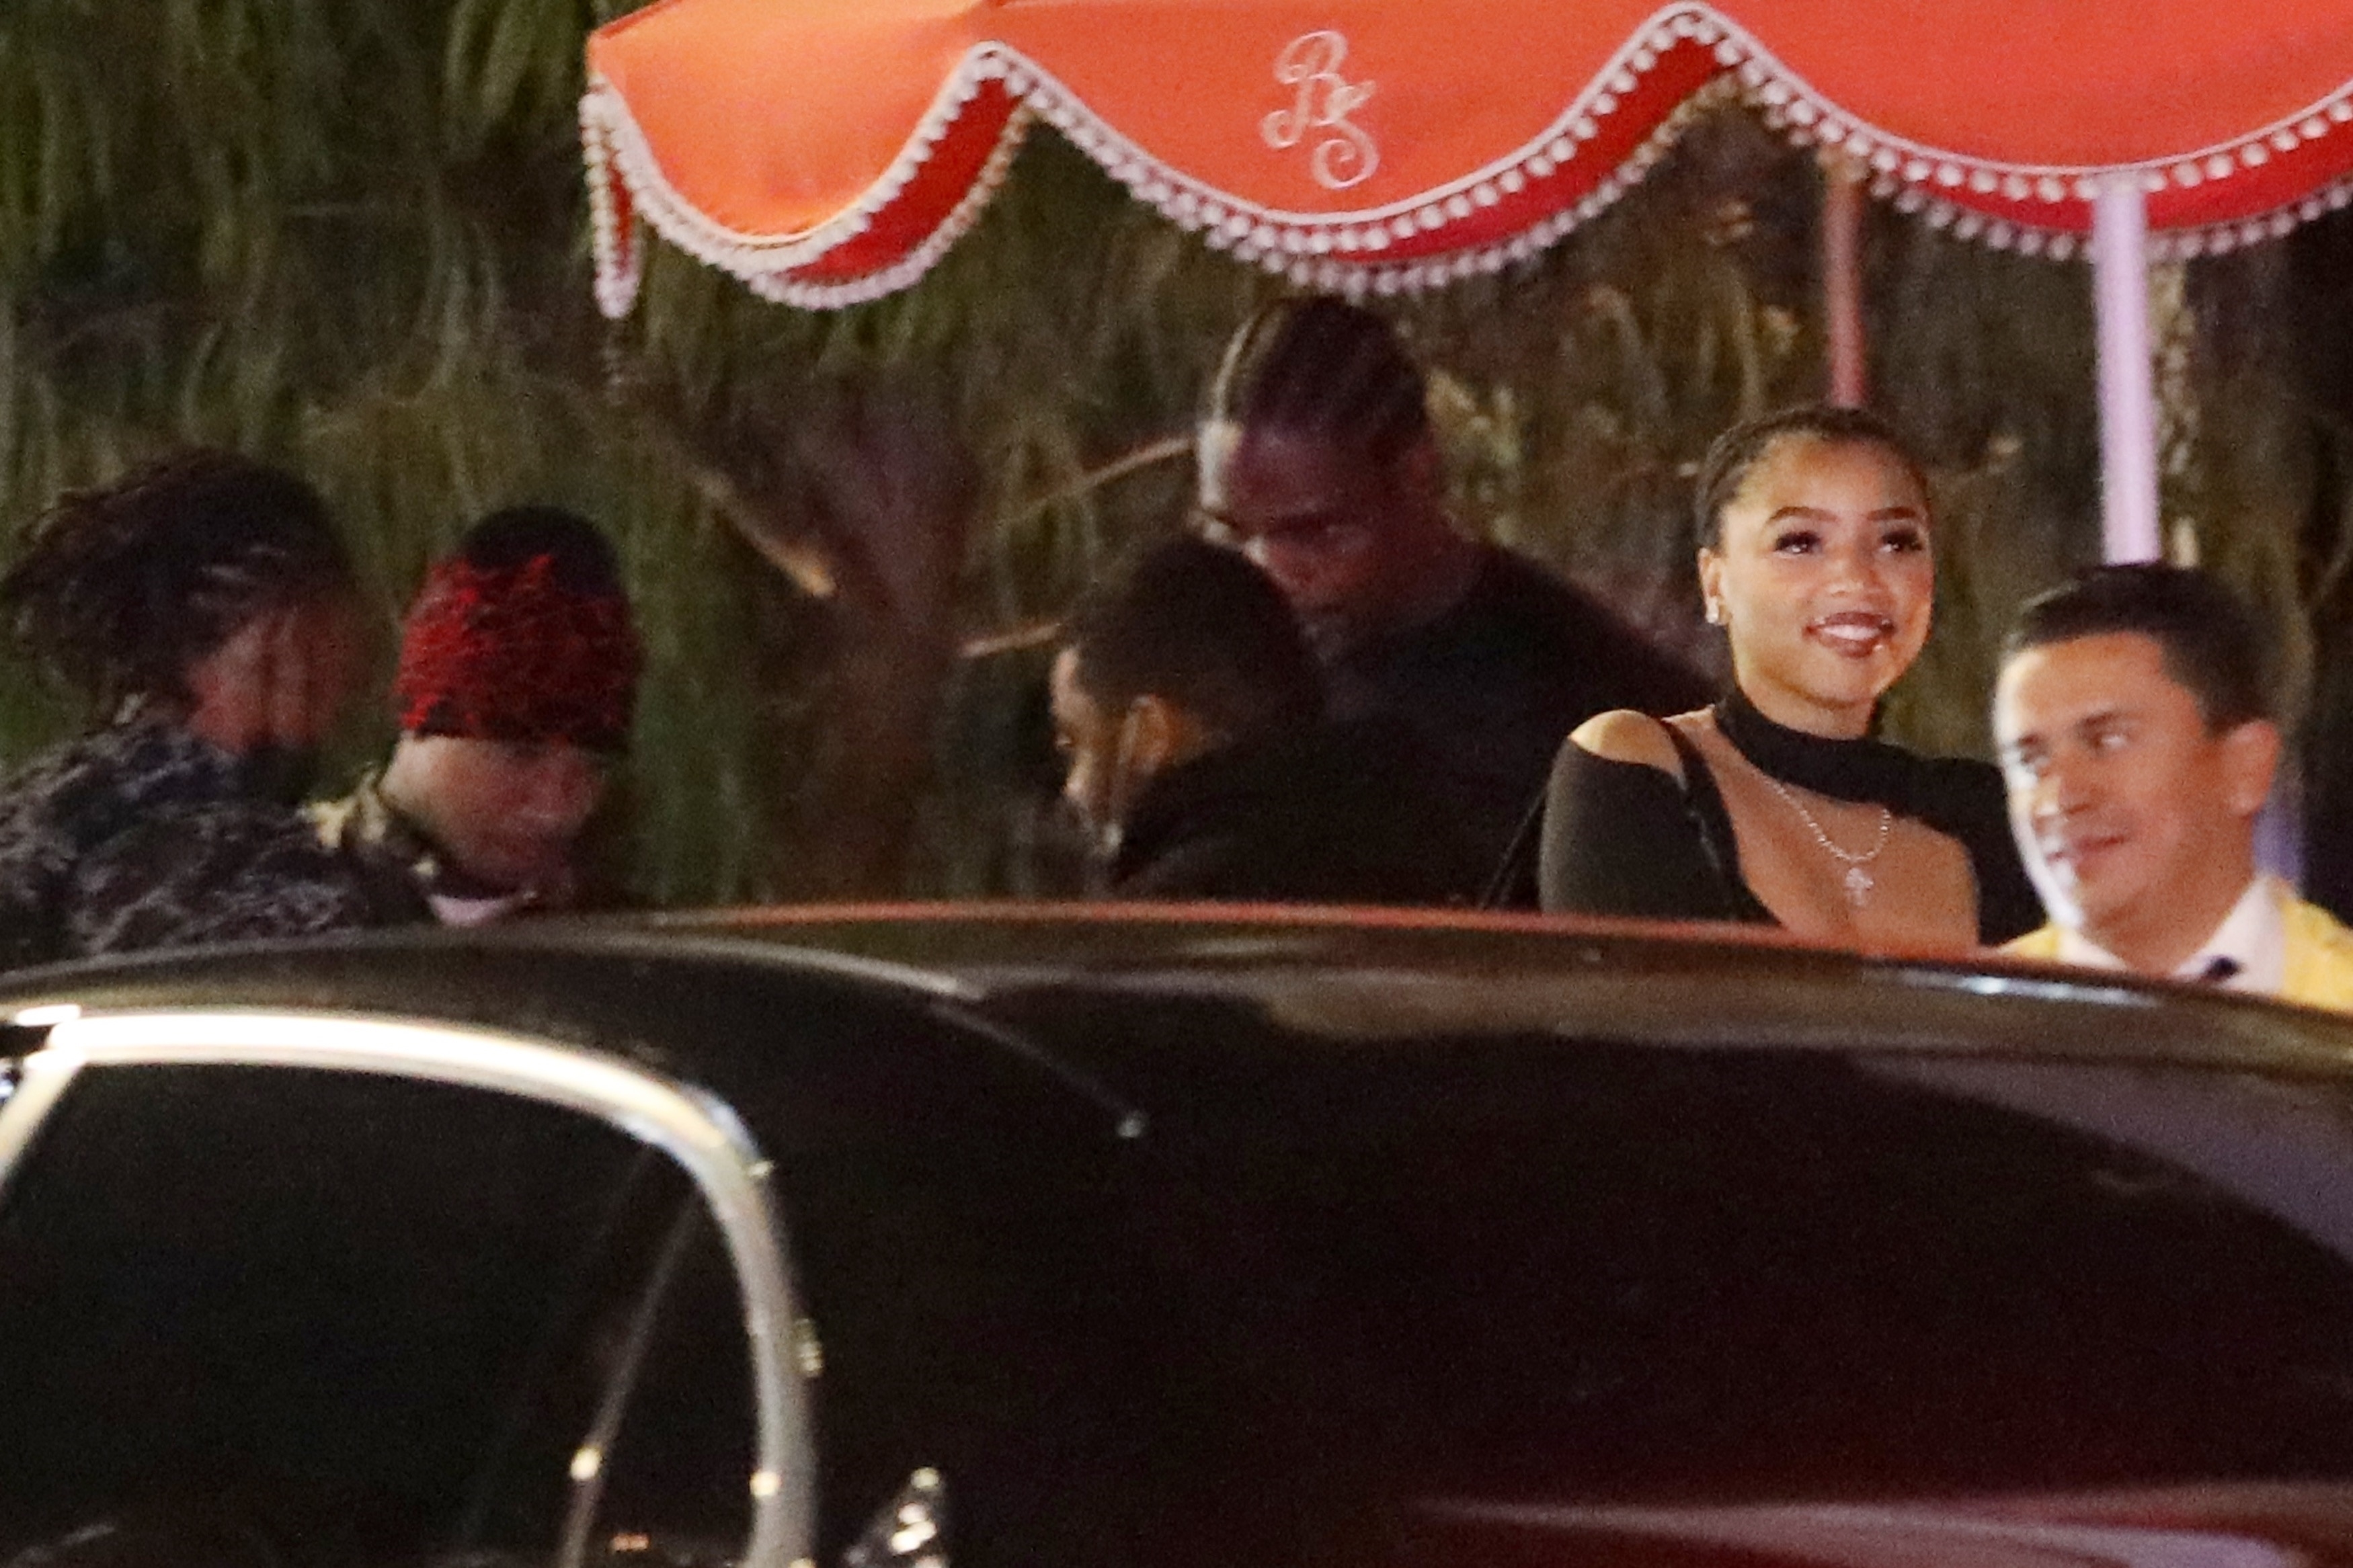 Tyga and Chloe both wore black ensembles for their night out together